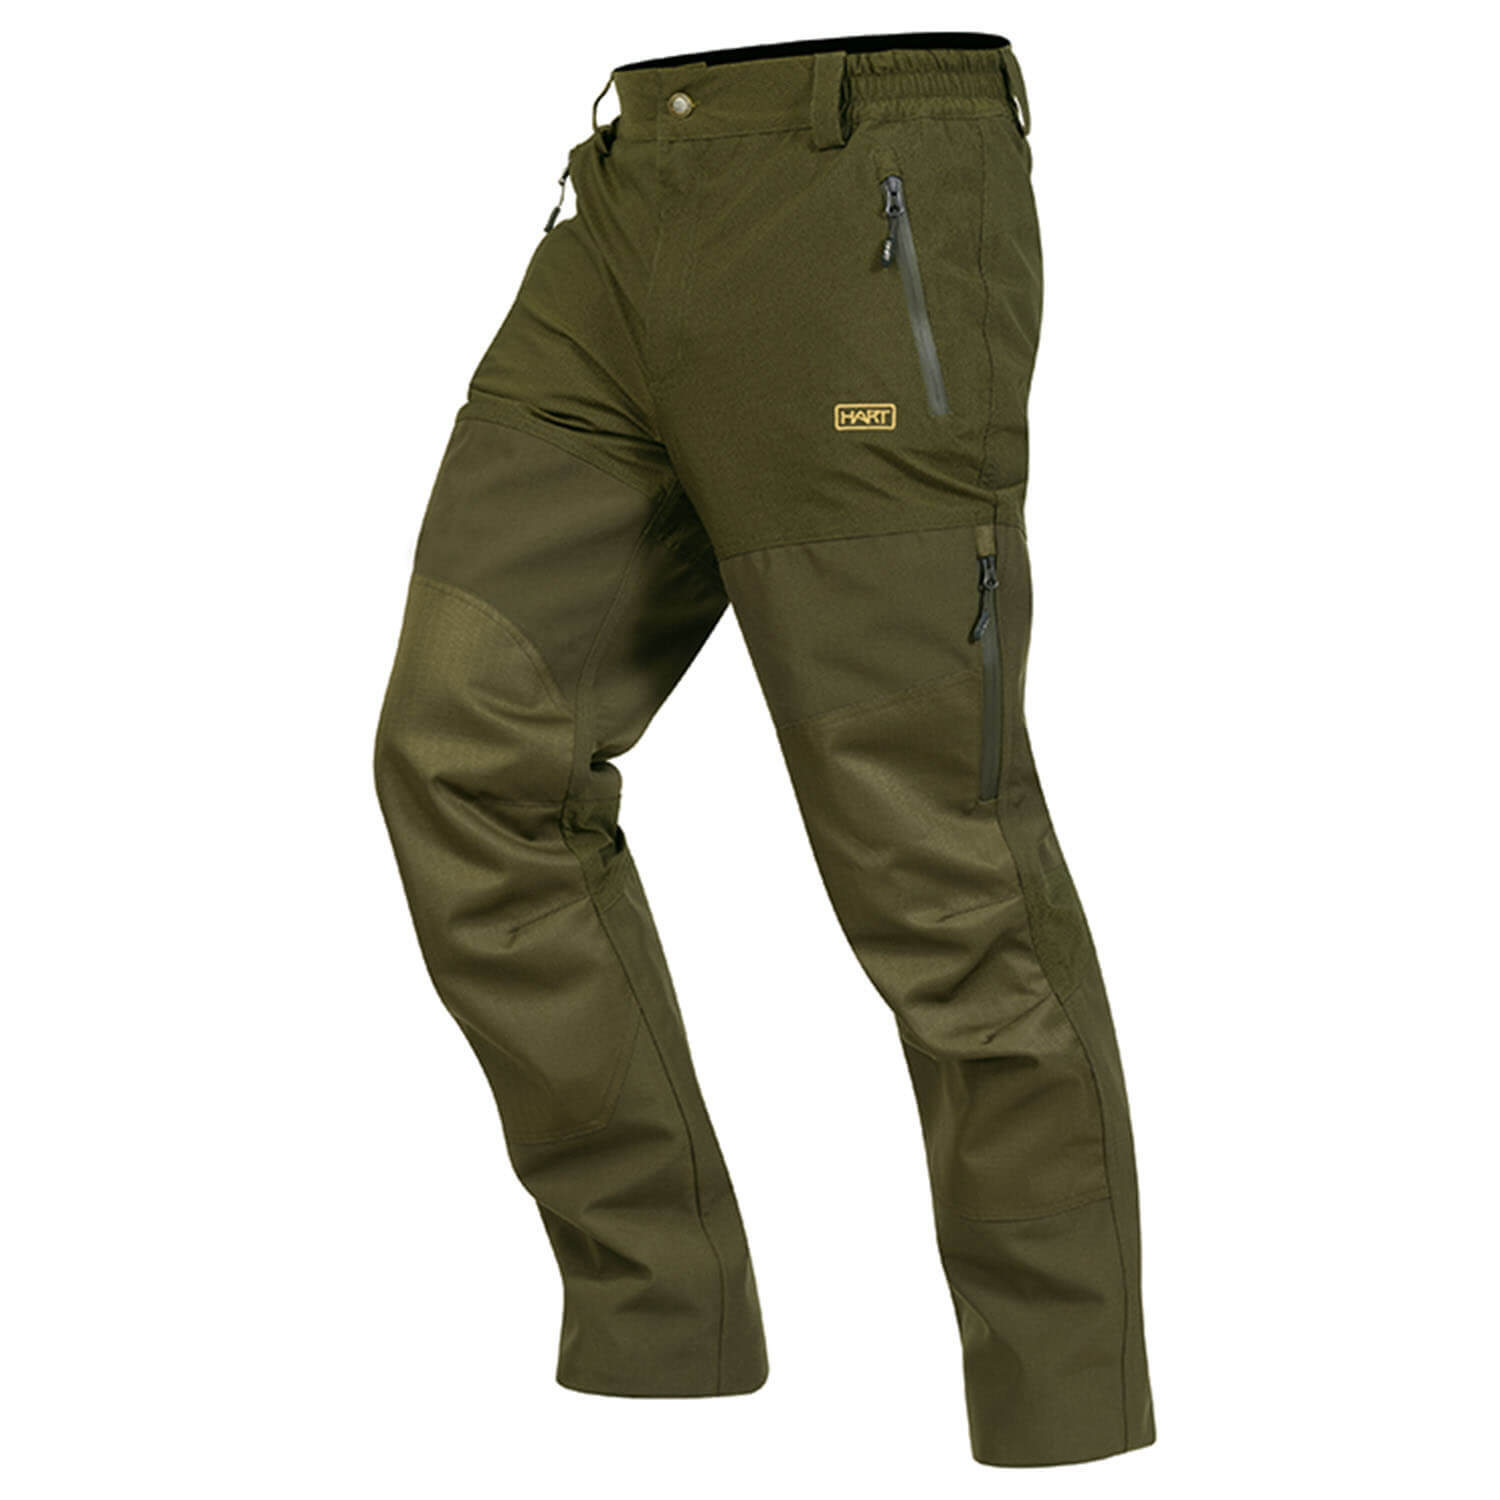 Hart hunting trousers Wildpro-T (green) - Blood Trailing